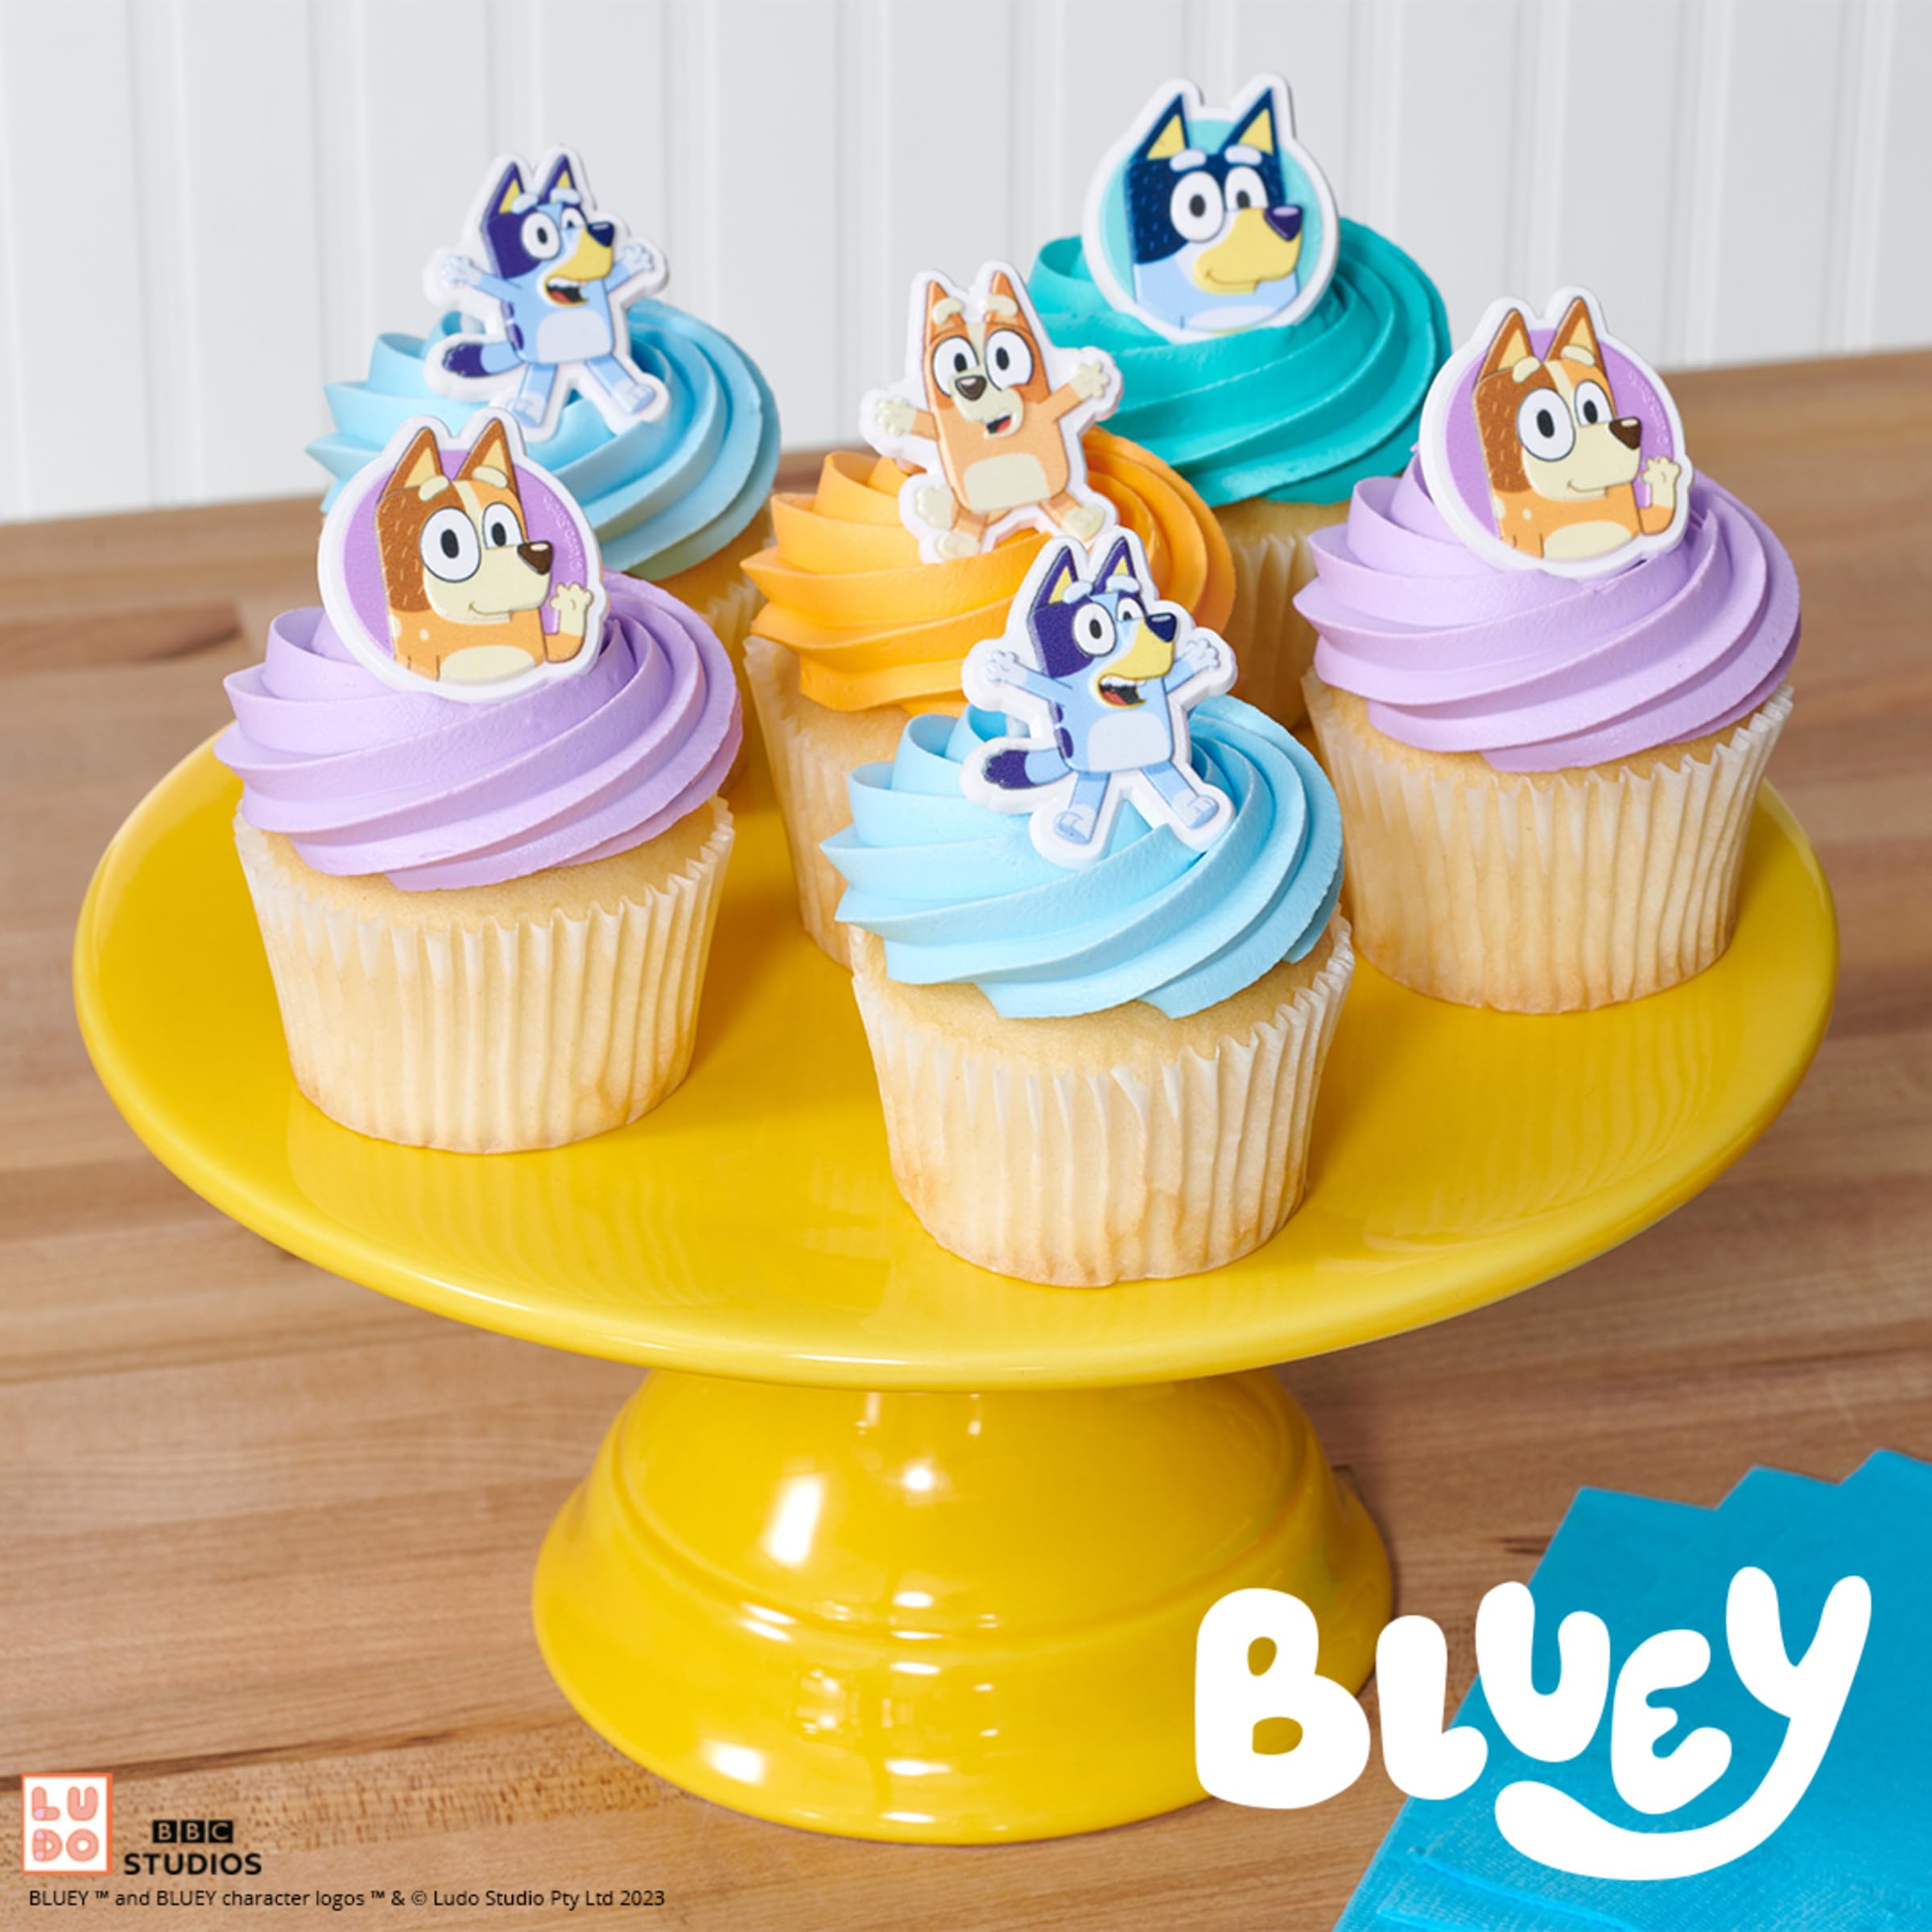 DecoPac Bluey So Much Fun Rings, Cupcake Decorations Featuring Bluey, Bingo, Bandit, and Chilli, 3D Food Safe Cake Toppers – 72 Pack